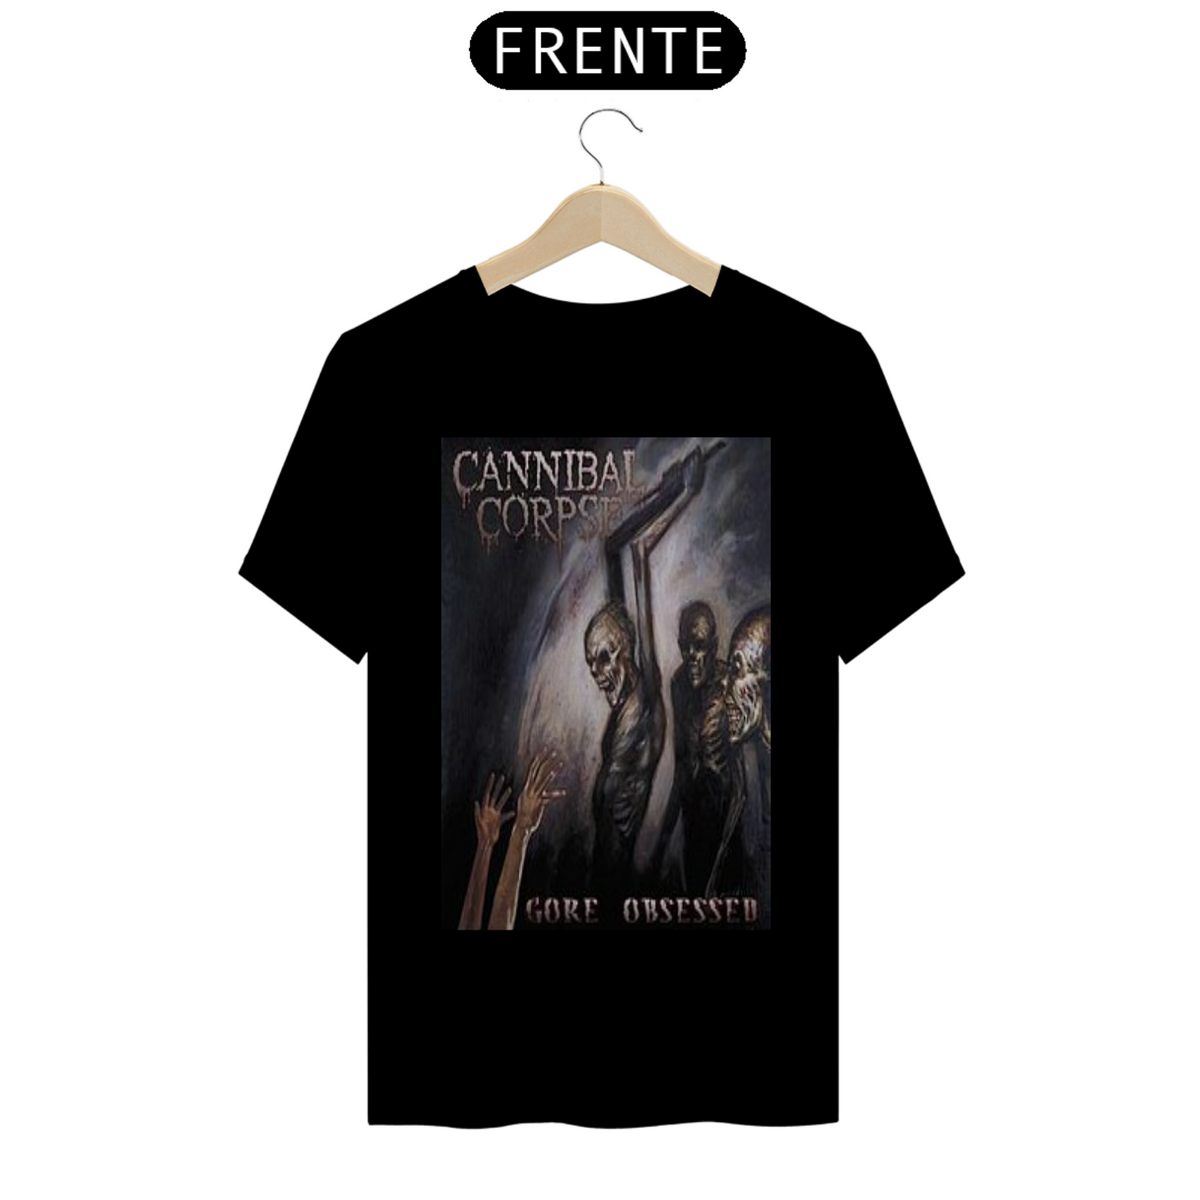 Nome do produto: Cannibal Corpse - Gore Obsessed